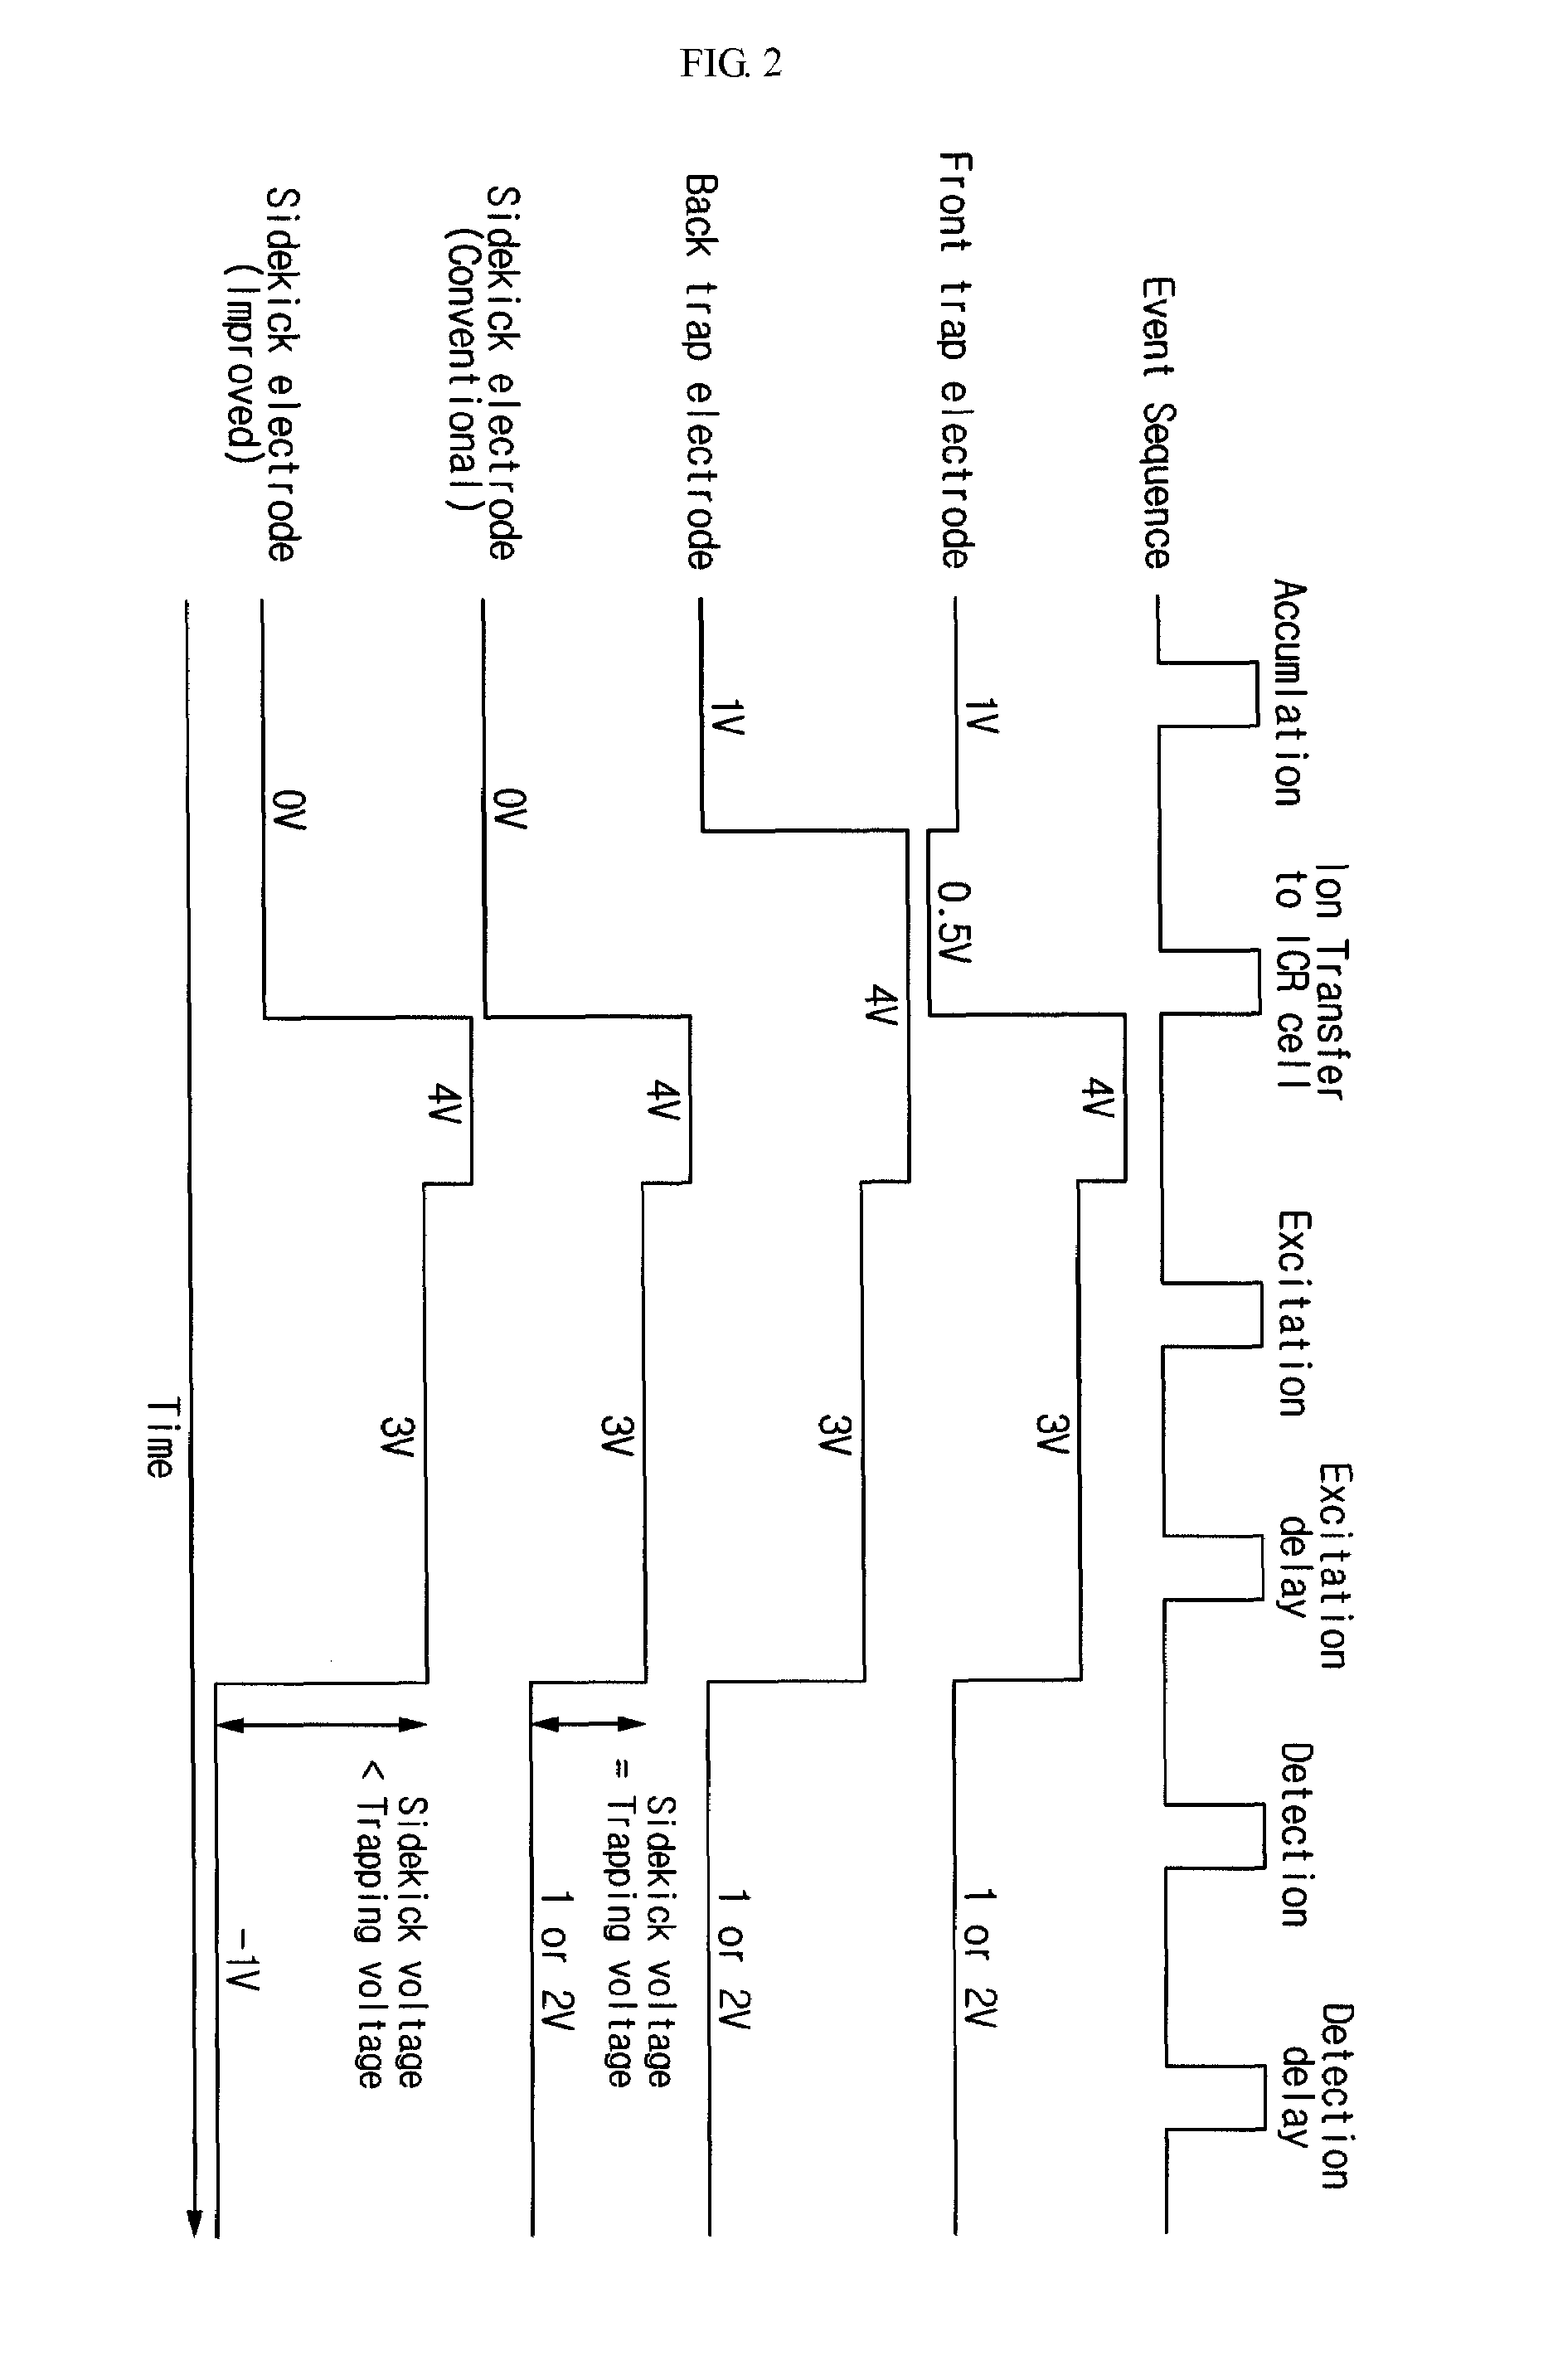 Apparatus and method for improving fourier transform ion cyclotron resonance mass spectrometer signal